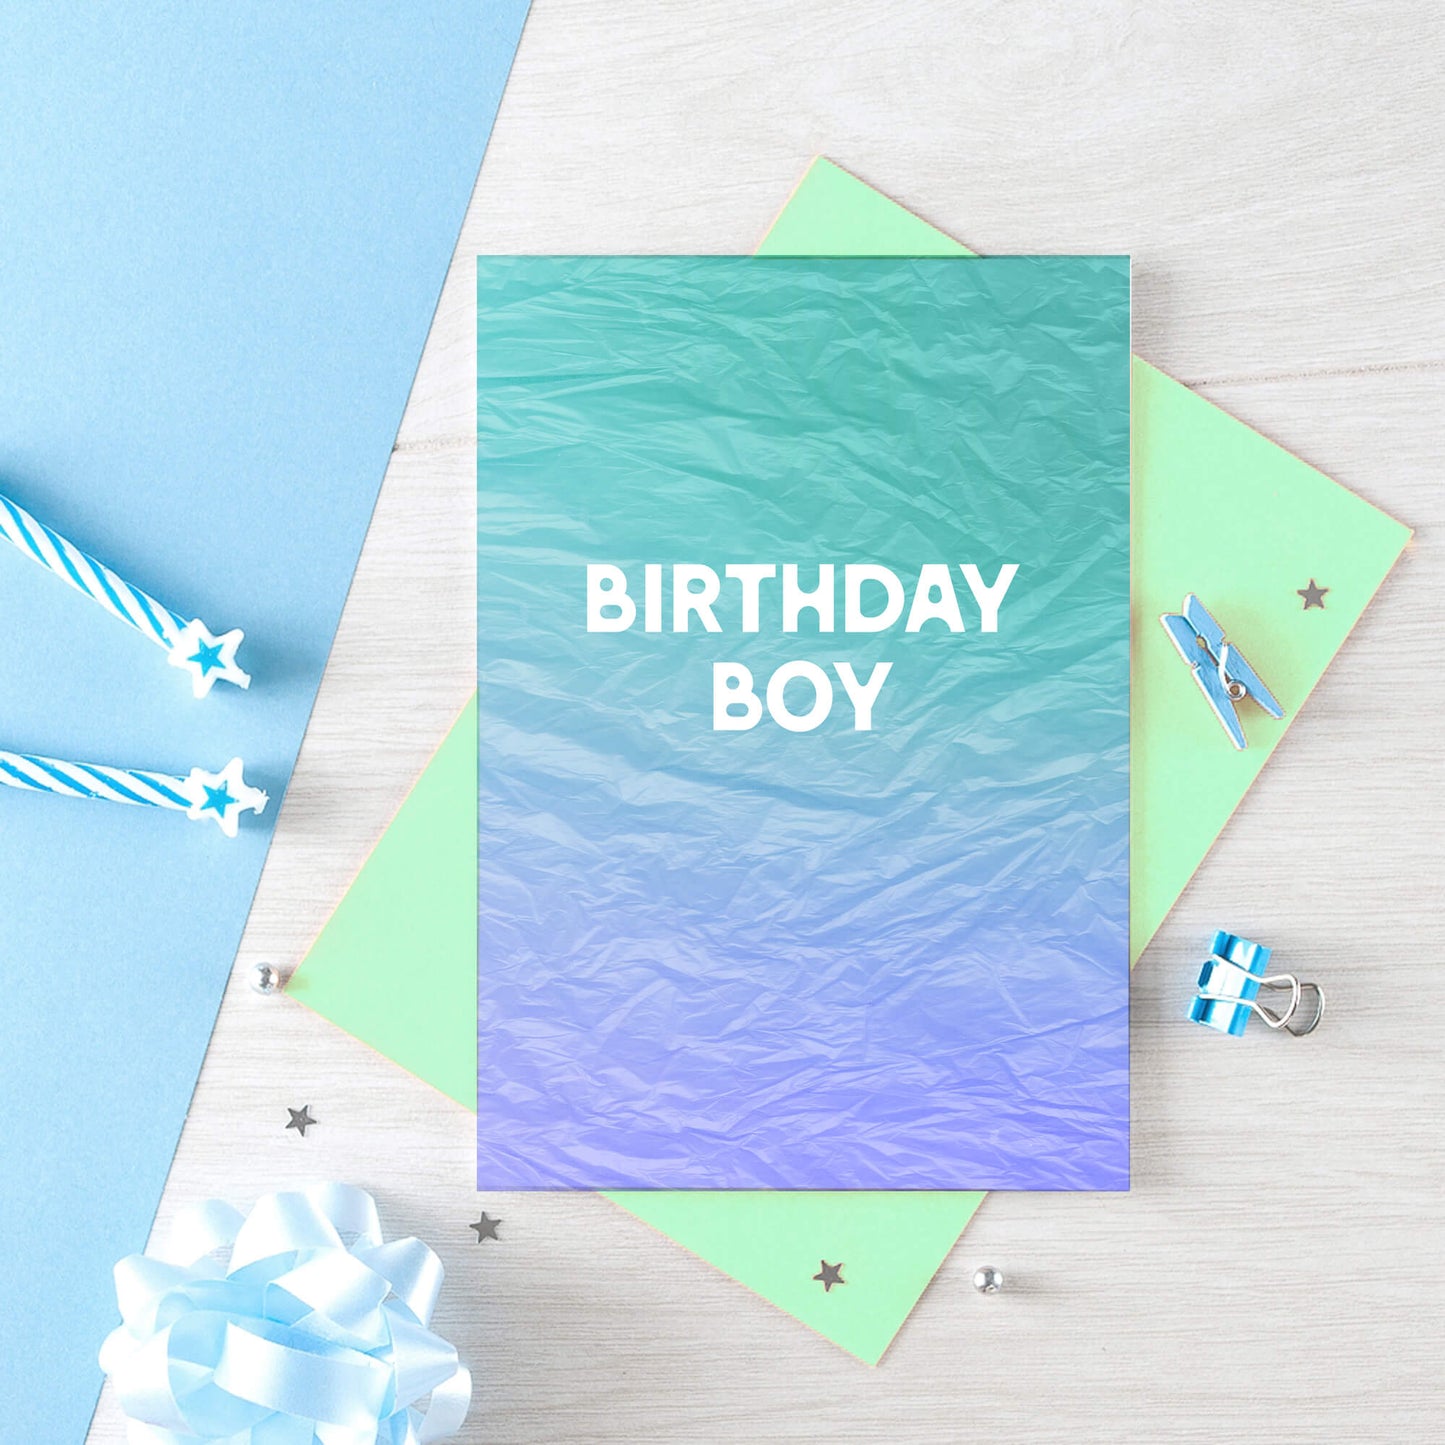 Birthday Boy by SixElevenCreations. Product Code SE4003A6